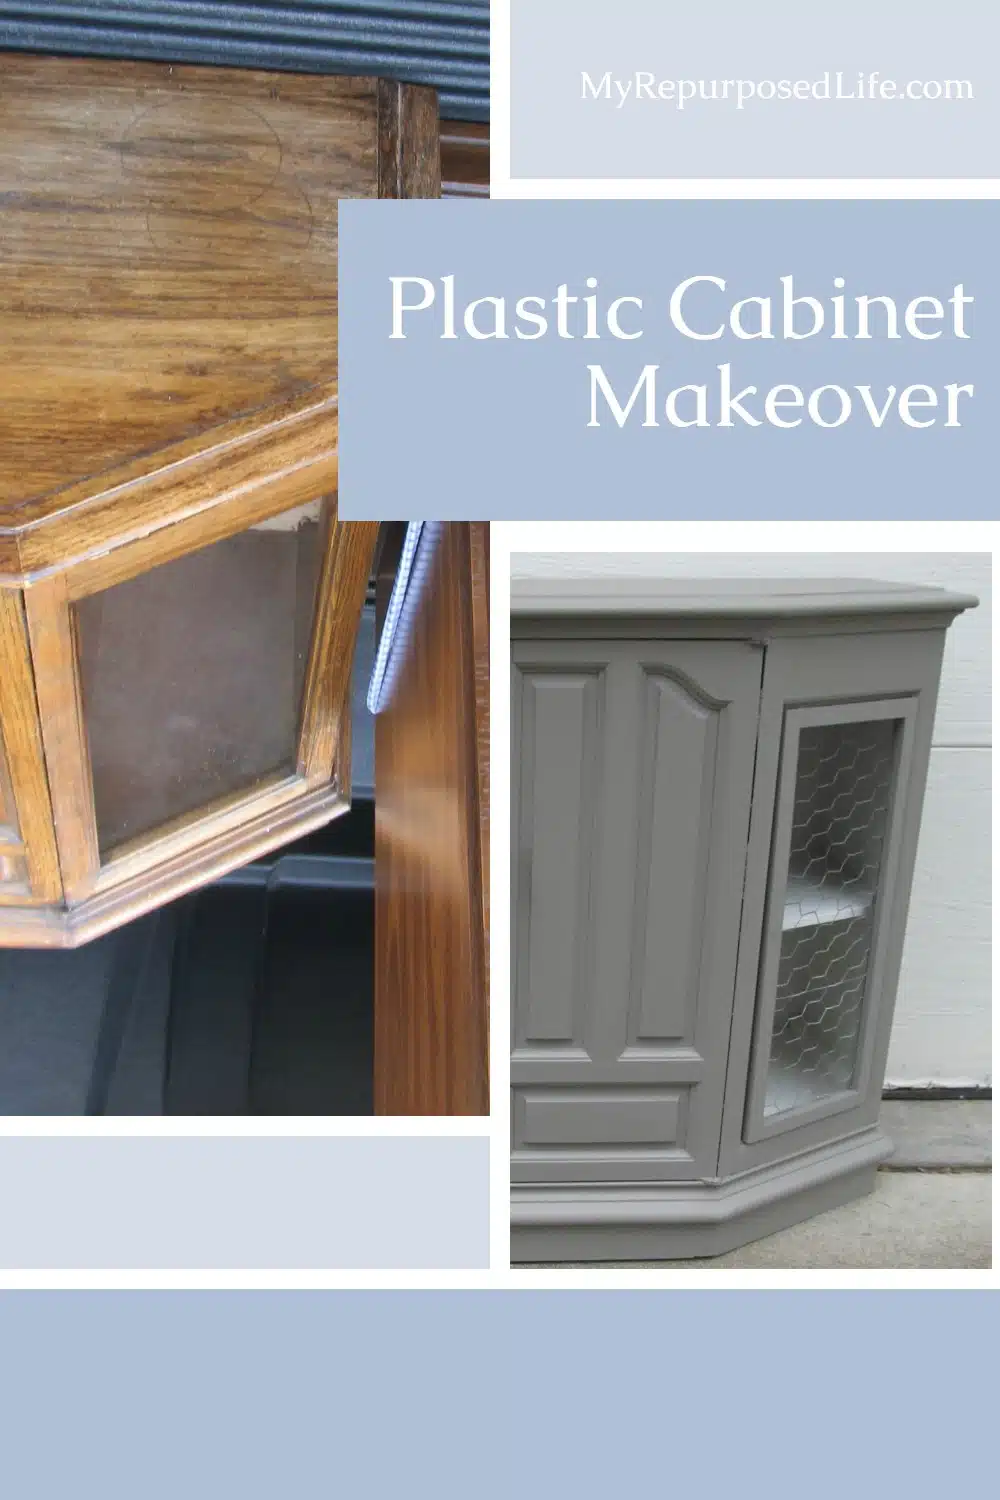 You won't believe this awesome plastic cabinet makeover. Maybe you call it a console? It's one of those plastic pieces made to look like wood. #MyRepurposedLife #repurposed #furniture #makeover #plastic #cabinet #painted #furniture via @repurposedlife